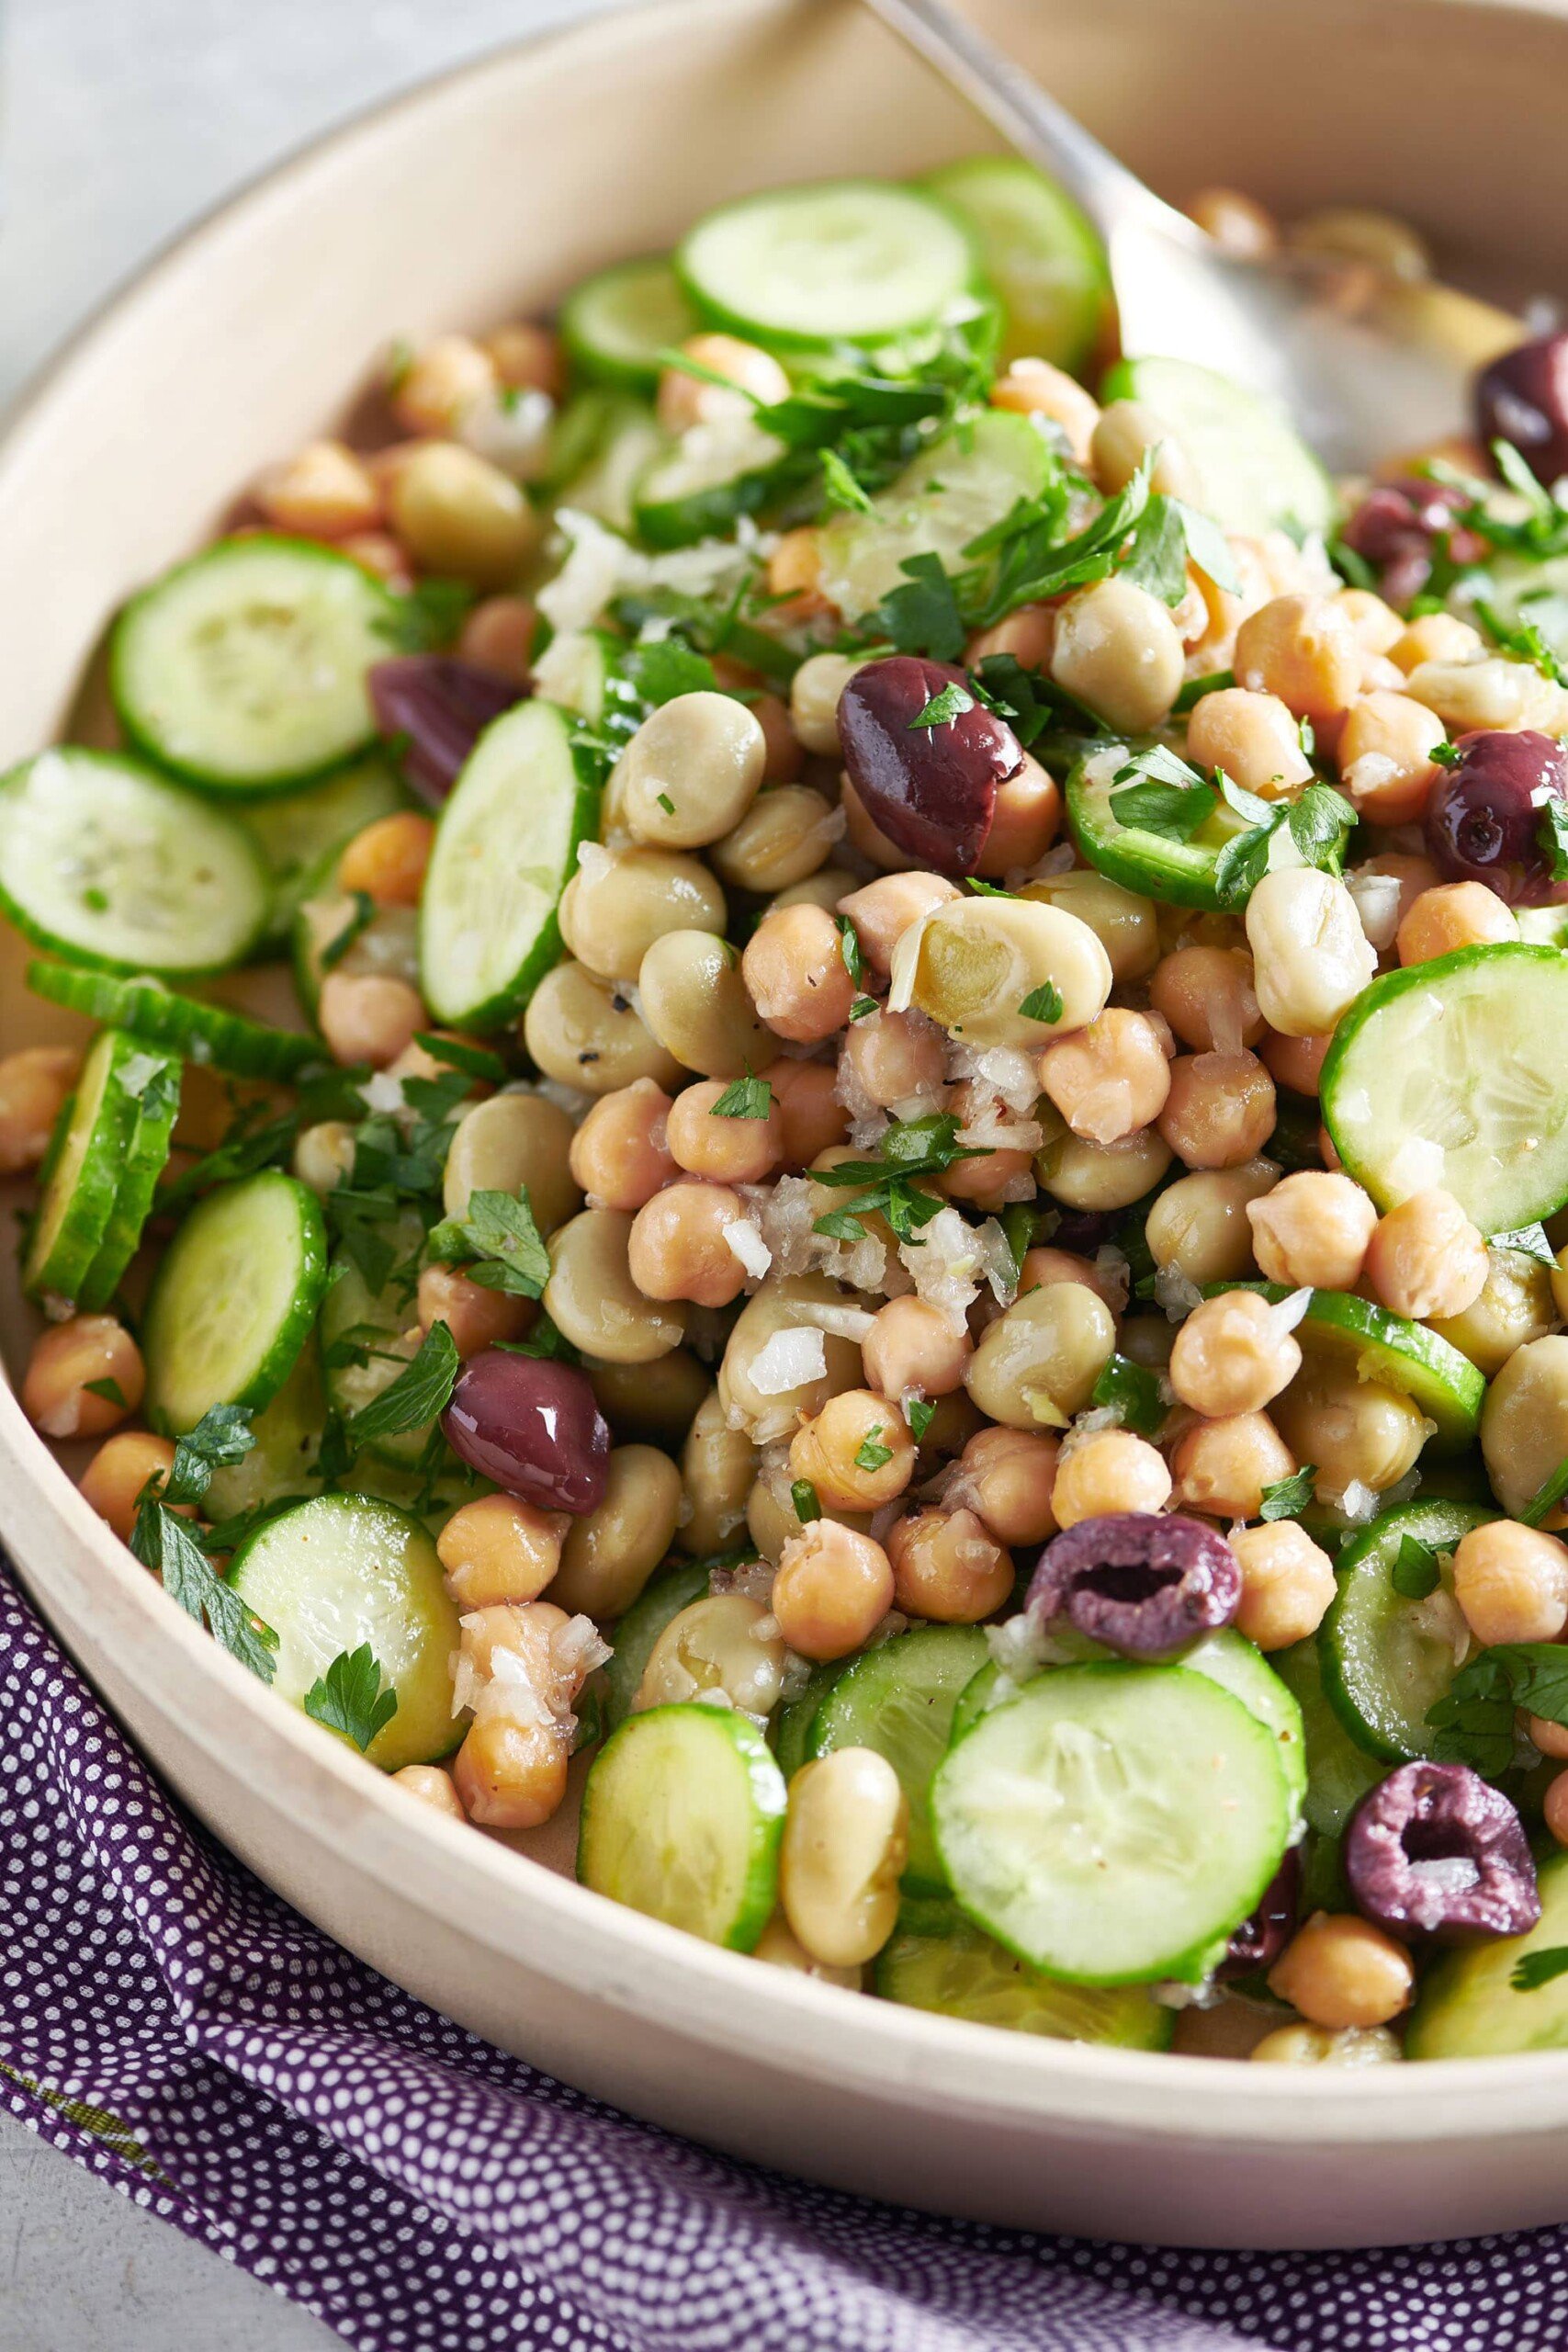 Bowl of chickpea and fava bean salad.